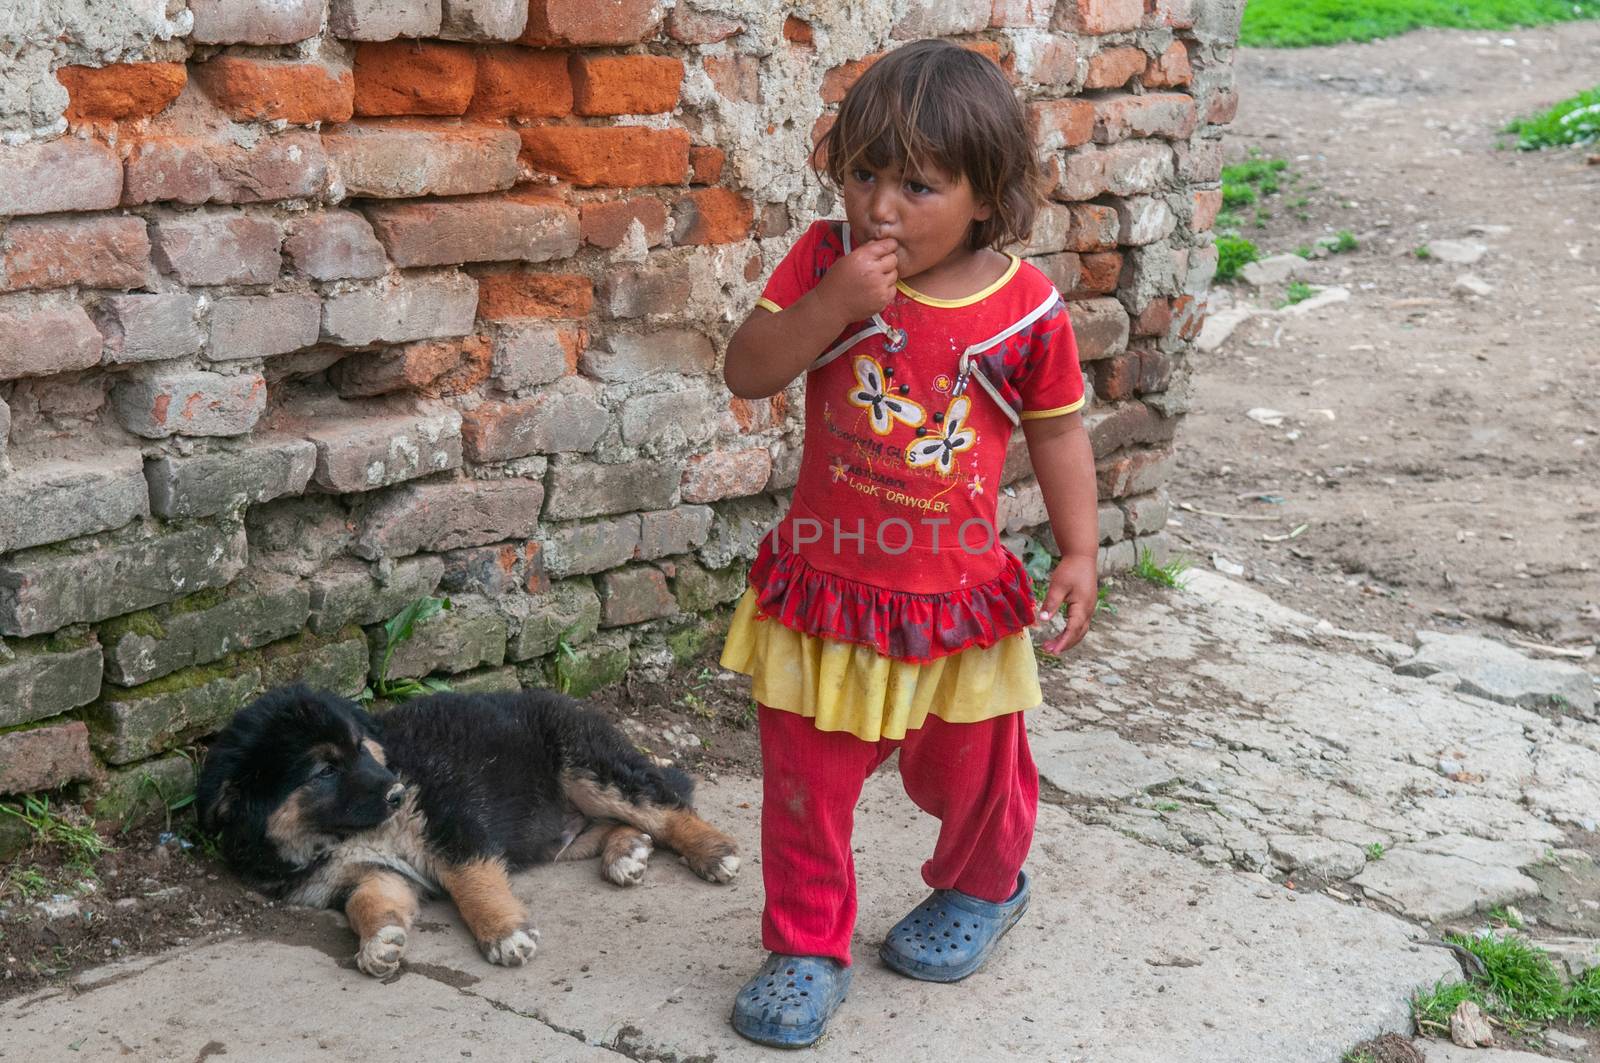 5/16/2018. Lomnicka, Slovakia. Roma community in the heart of Slovakia, living in horrible conditions. Portrait of child.